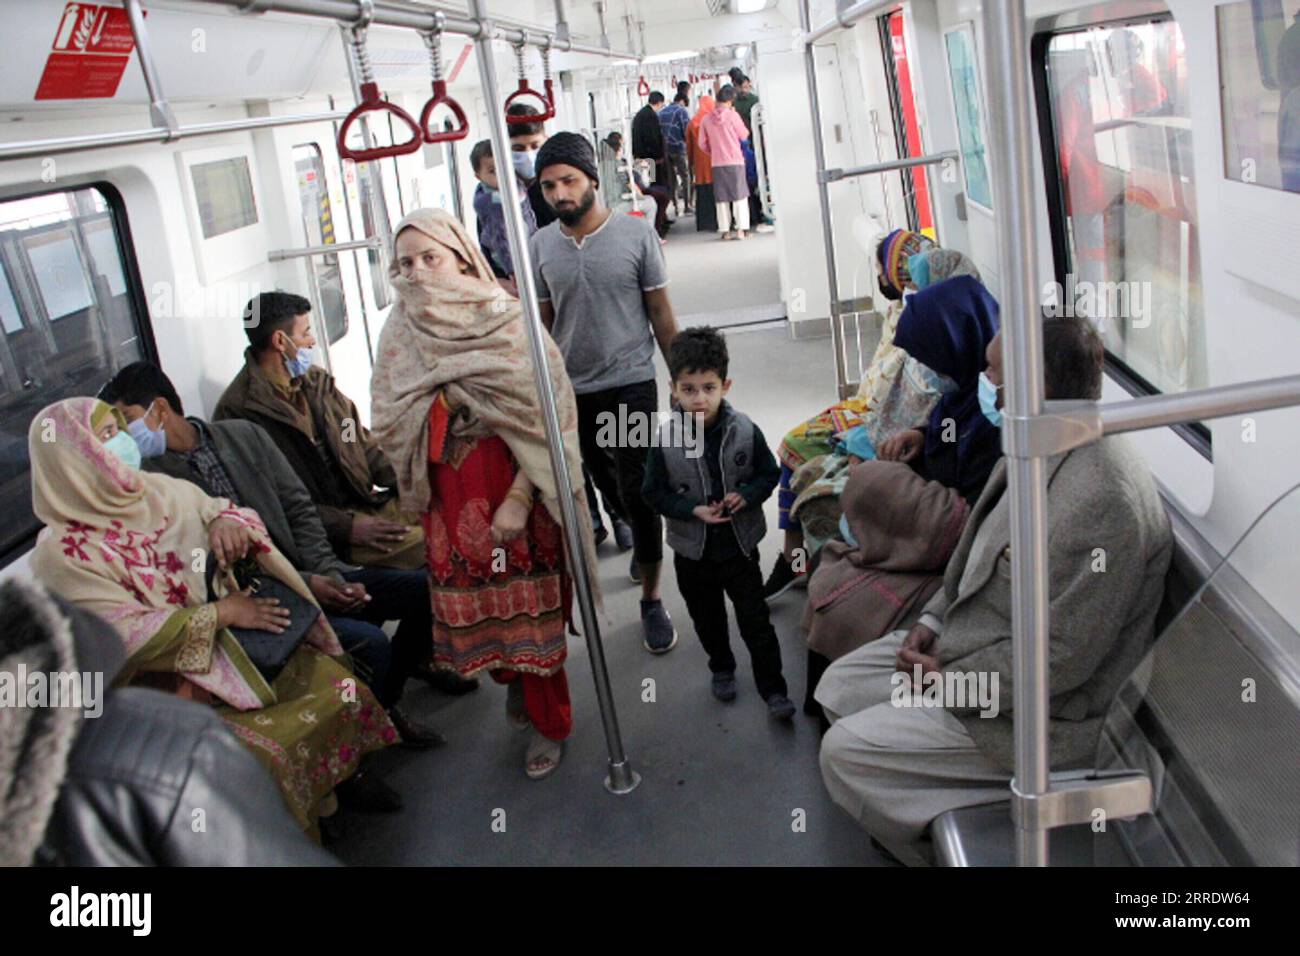 220109 -- LAHORE, Jan. 9, 2022 -- People take the Orange Line metro train in Lahore, Pakistan, Dec. 29, 2021. Officially open to traffic on Oct. 25, 2020, the eco-friendly Orange Line metro train is an early project under the China-Pakistan Economic Corridor CPEC, a flagship project of the China-proposed Belt and Road Initiative. TO GO WITH Feature: Lahore Orange Line, epitome of China-Pakistan friendship Photo by /Xinhua PAKISTAN-LAHORE-B&R-CPEC-ORANGE LINE METRO TRAIN JamilxAhmed PUBLICATIONxNOTxINxCHN Stock Photo